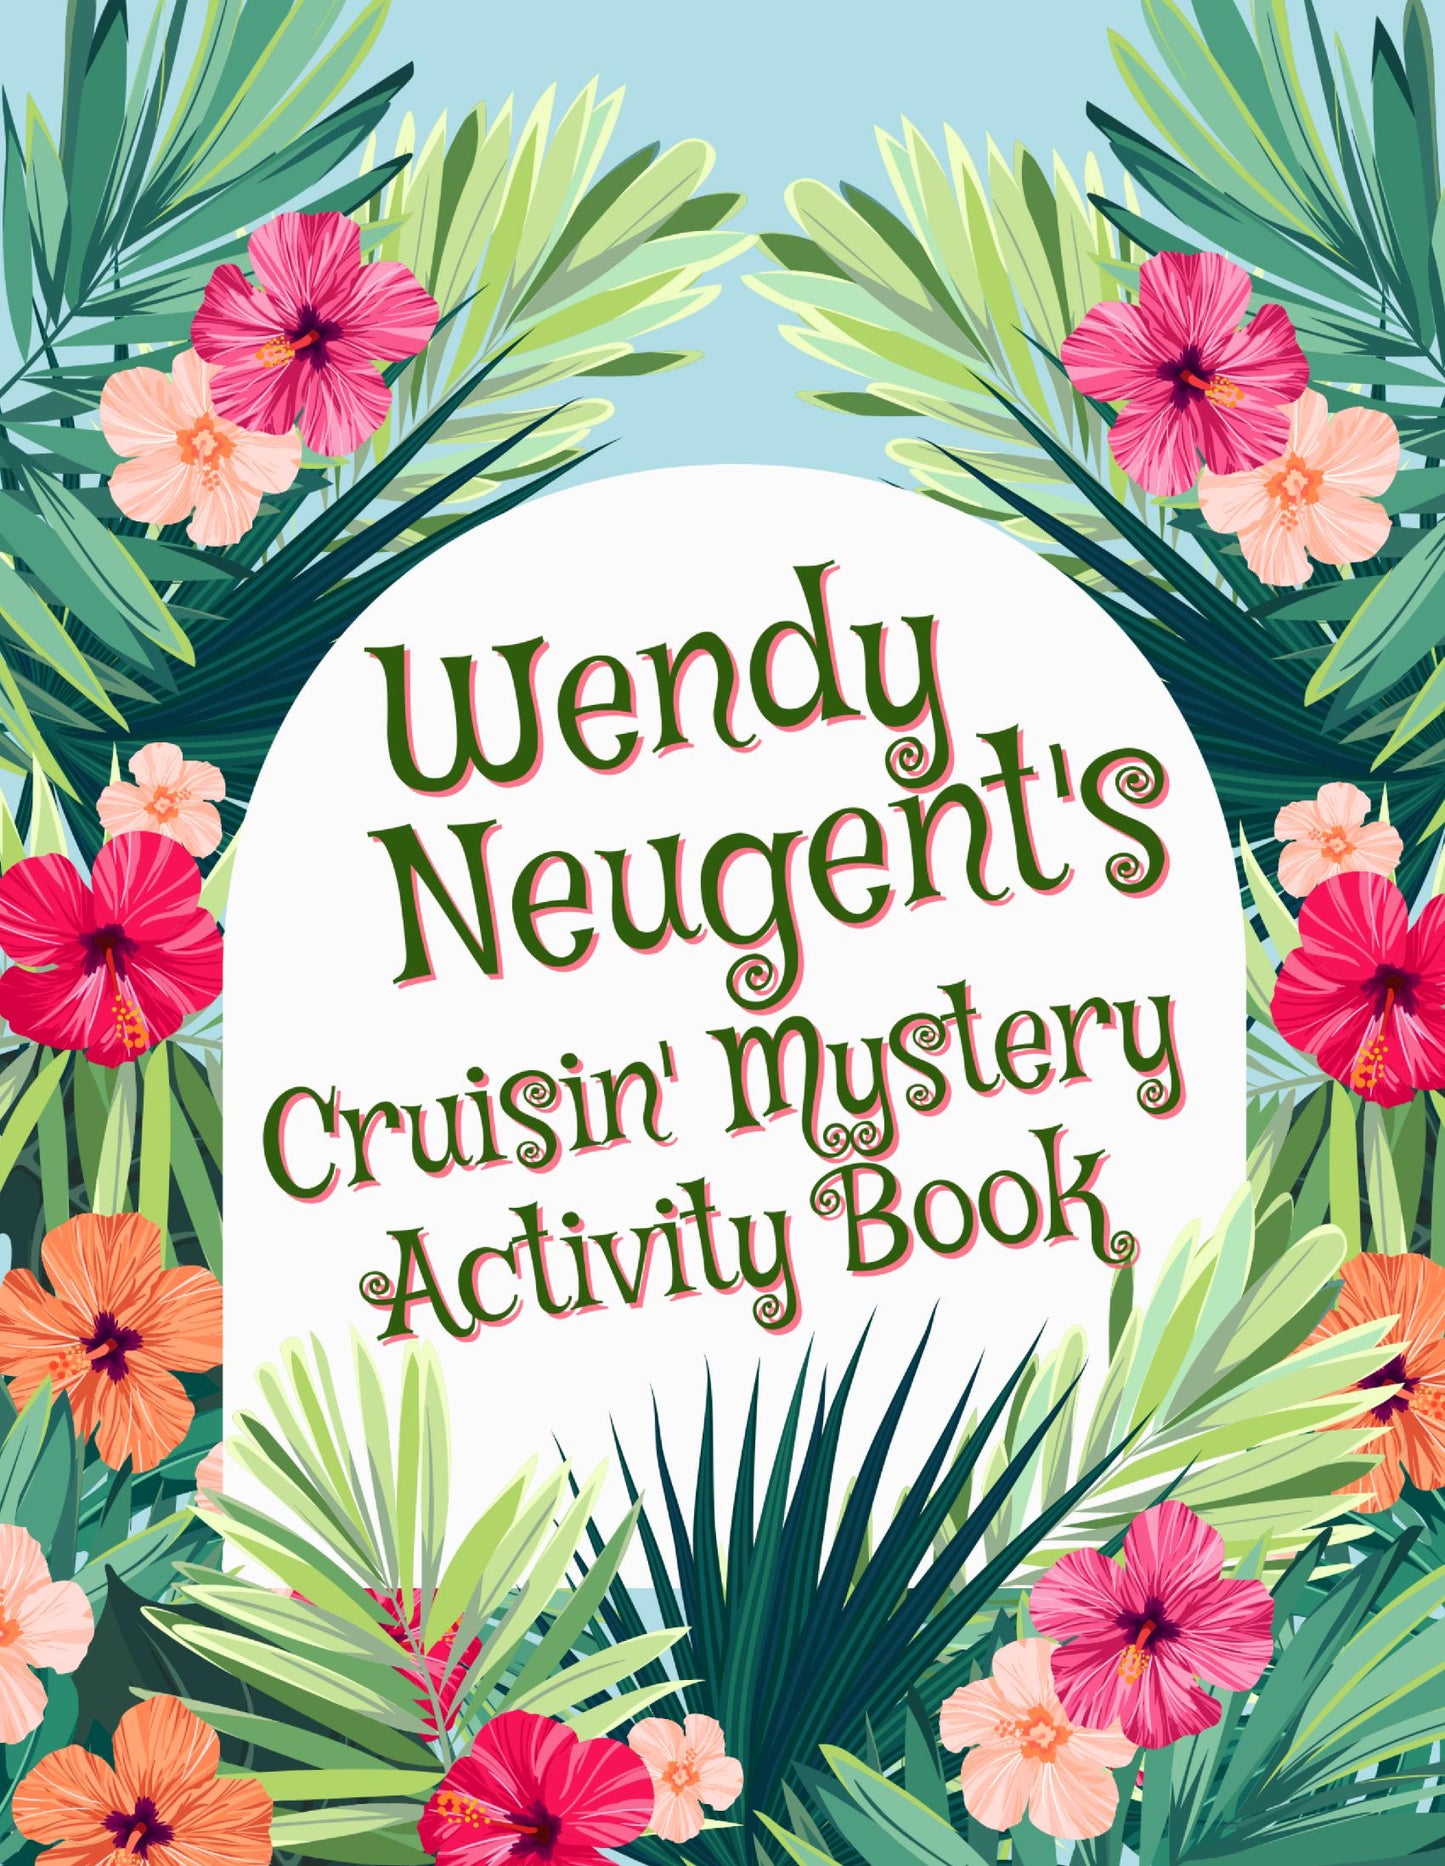 Wendy Neugent's Cruisin' Mystery Activity Book (paperback)